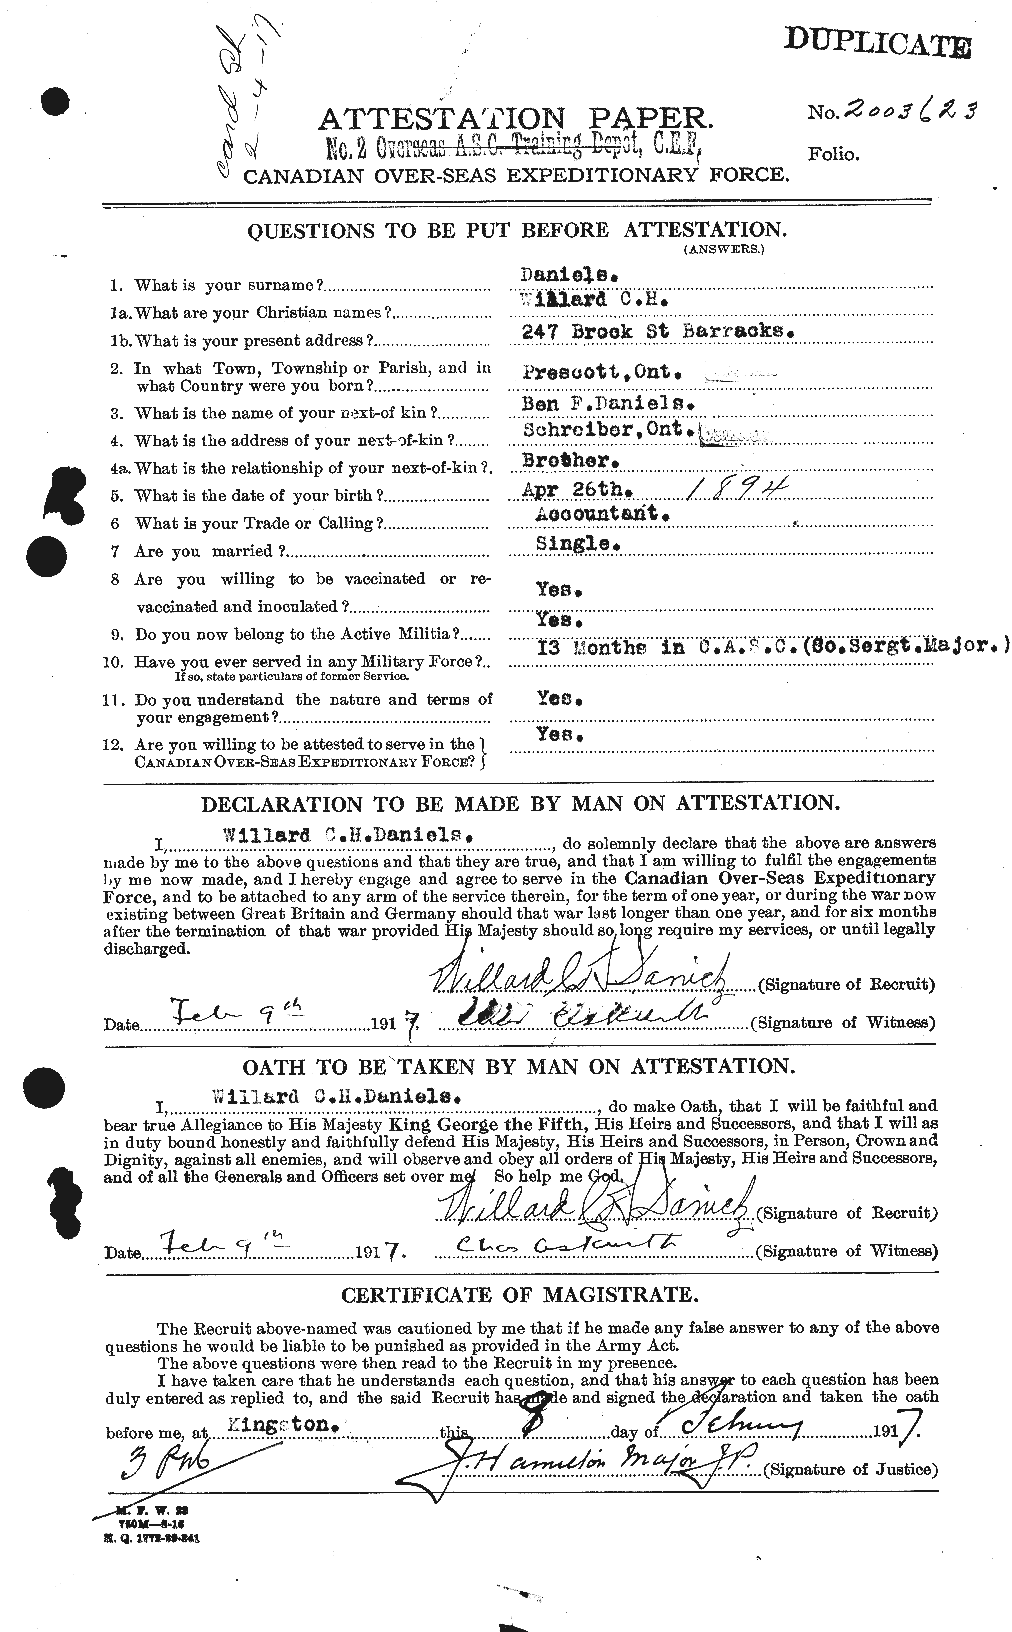 Personnel Records of the First World War - CEF 279687a